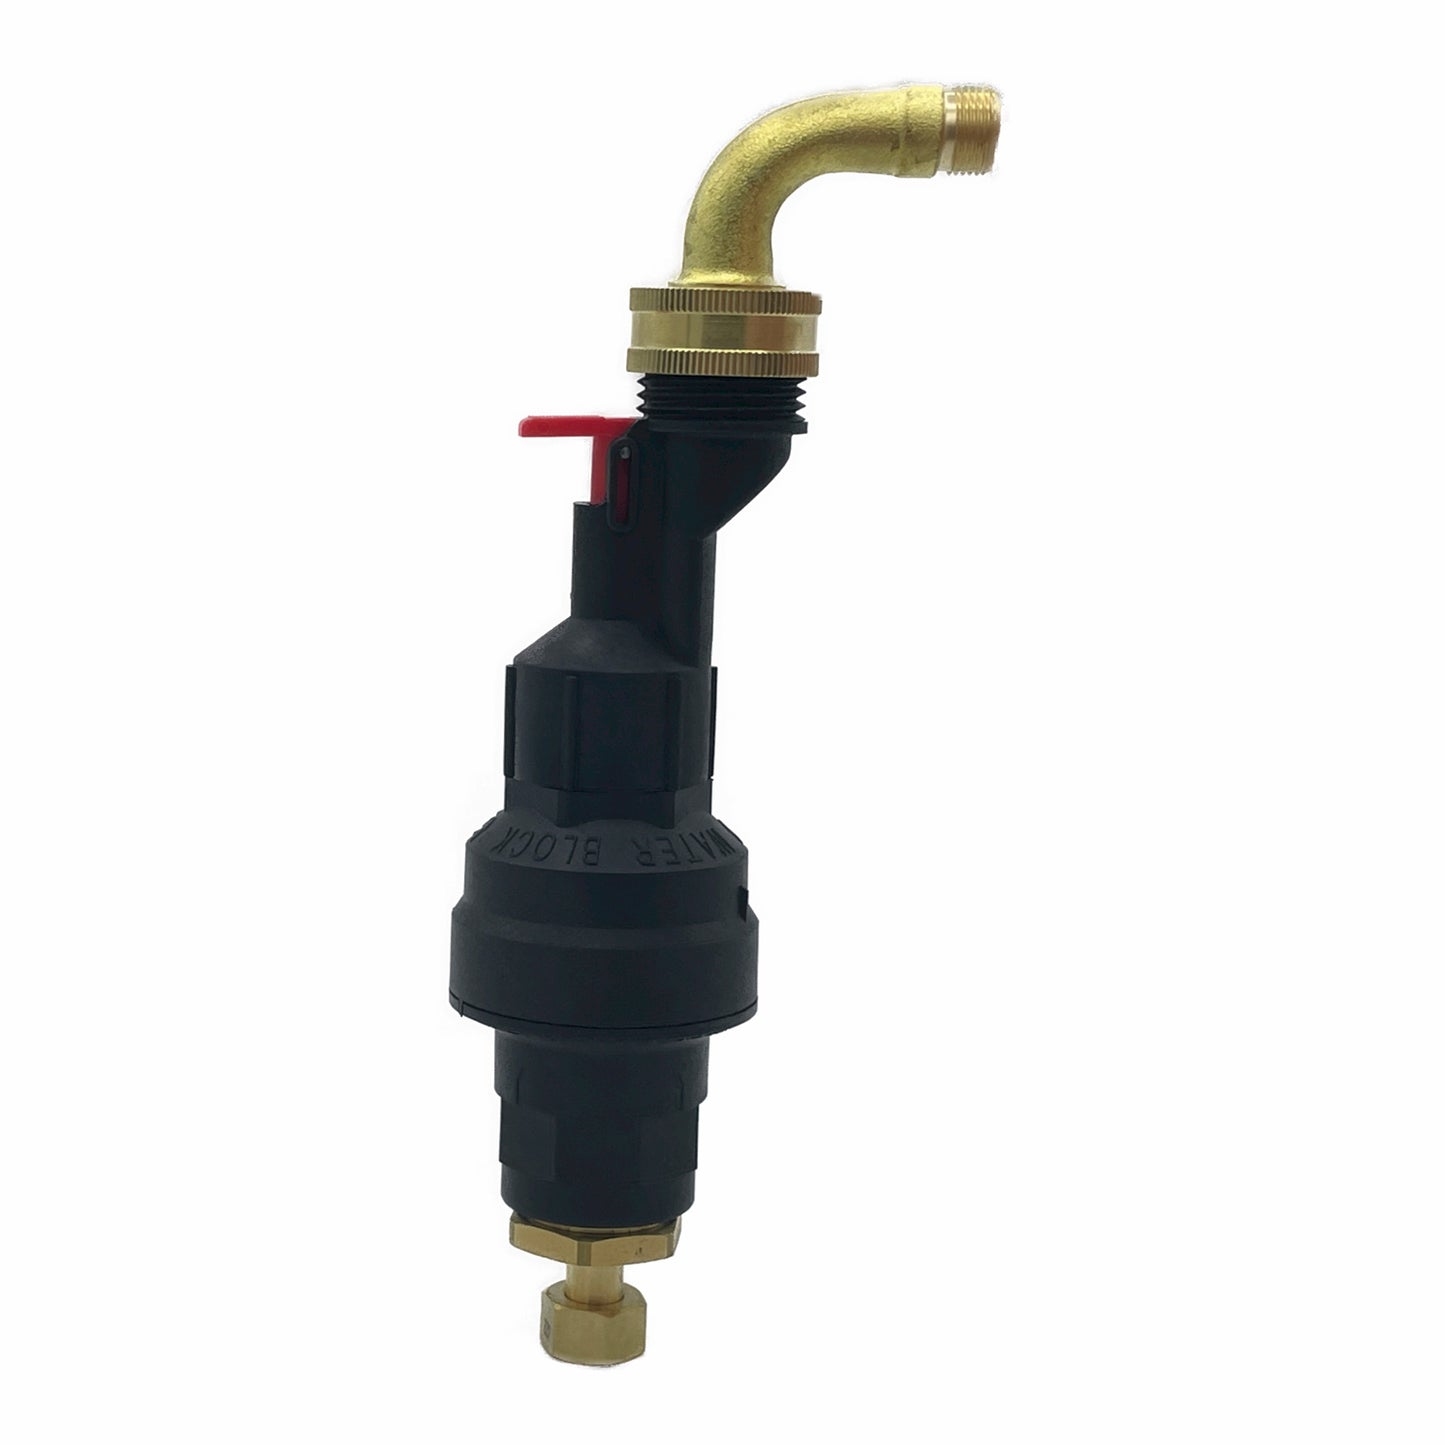 A water shutoff technology for stopping running toilets. The device installs directly on the water supply shutoff valve and connects to a 3/8" toilet hose.  Stops flapper leaks, water overflows, burst hoses, and other running water issues.